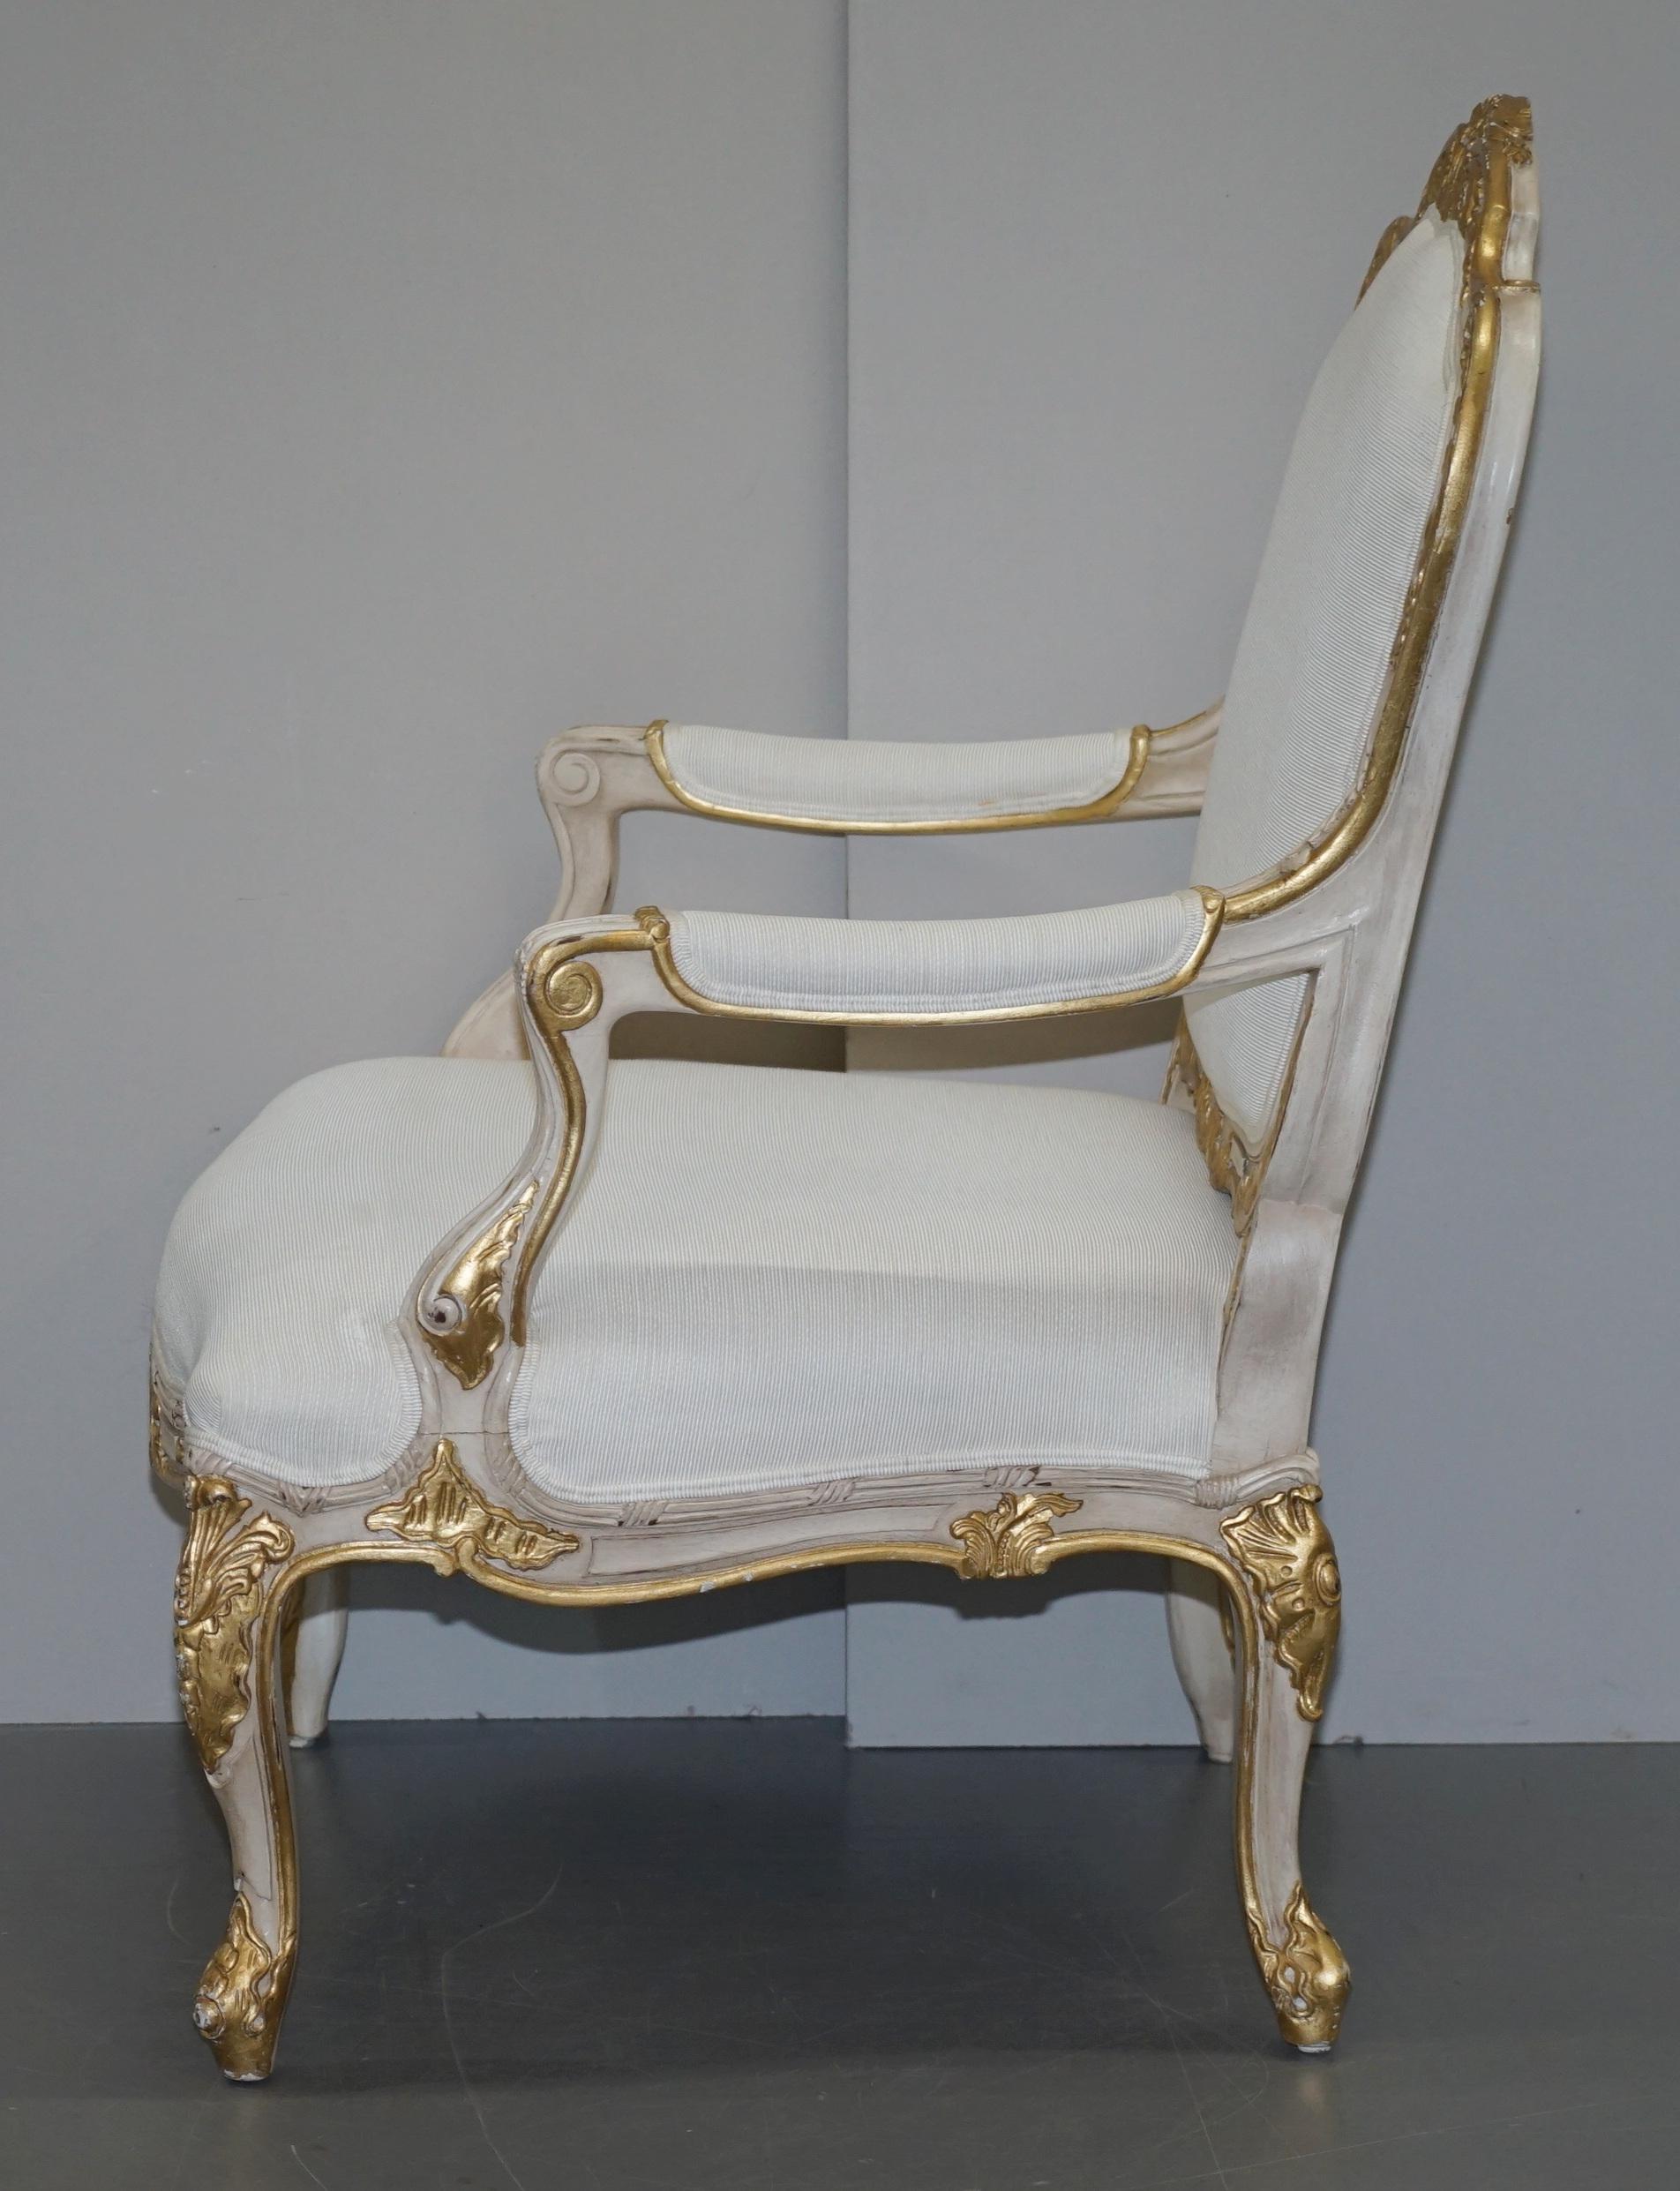 Hand-Painted Sublime Ralph Lauren Indian Cove Lodge Fauteuil from the Cannes Estate Suite